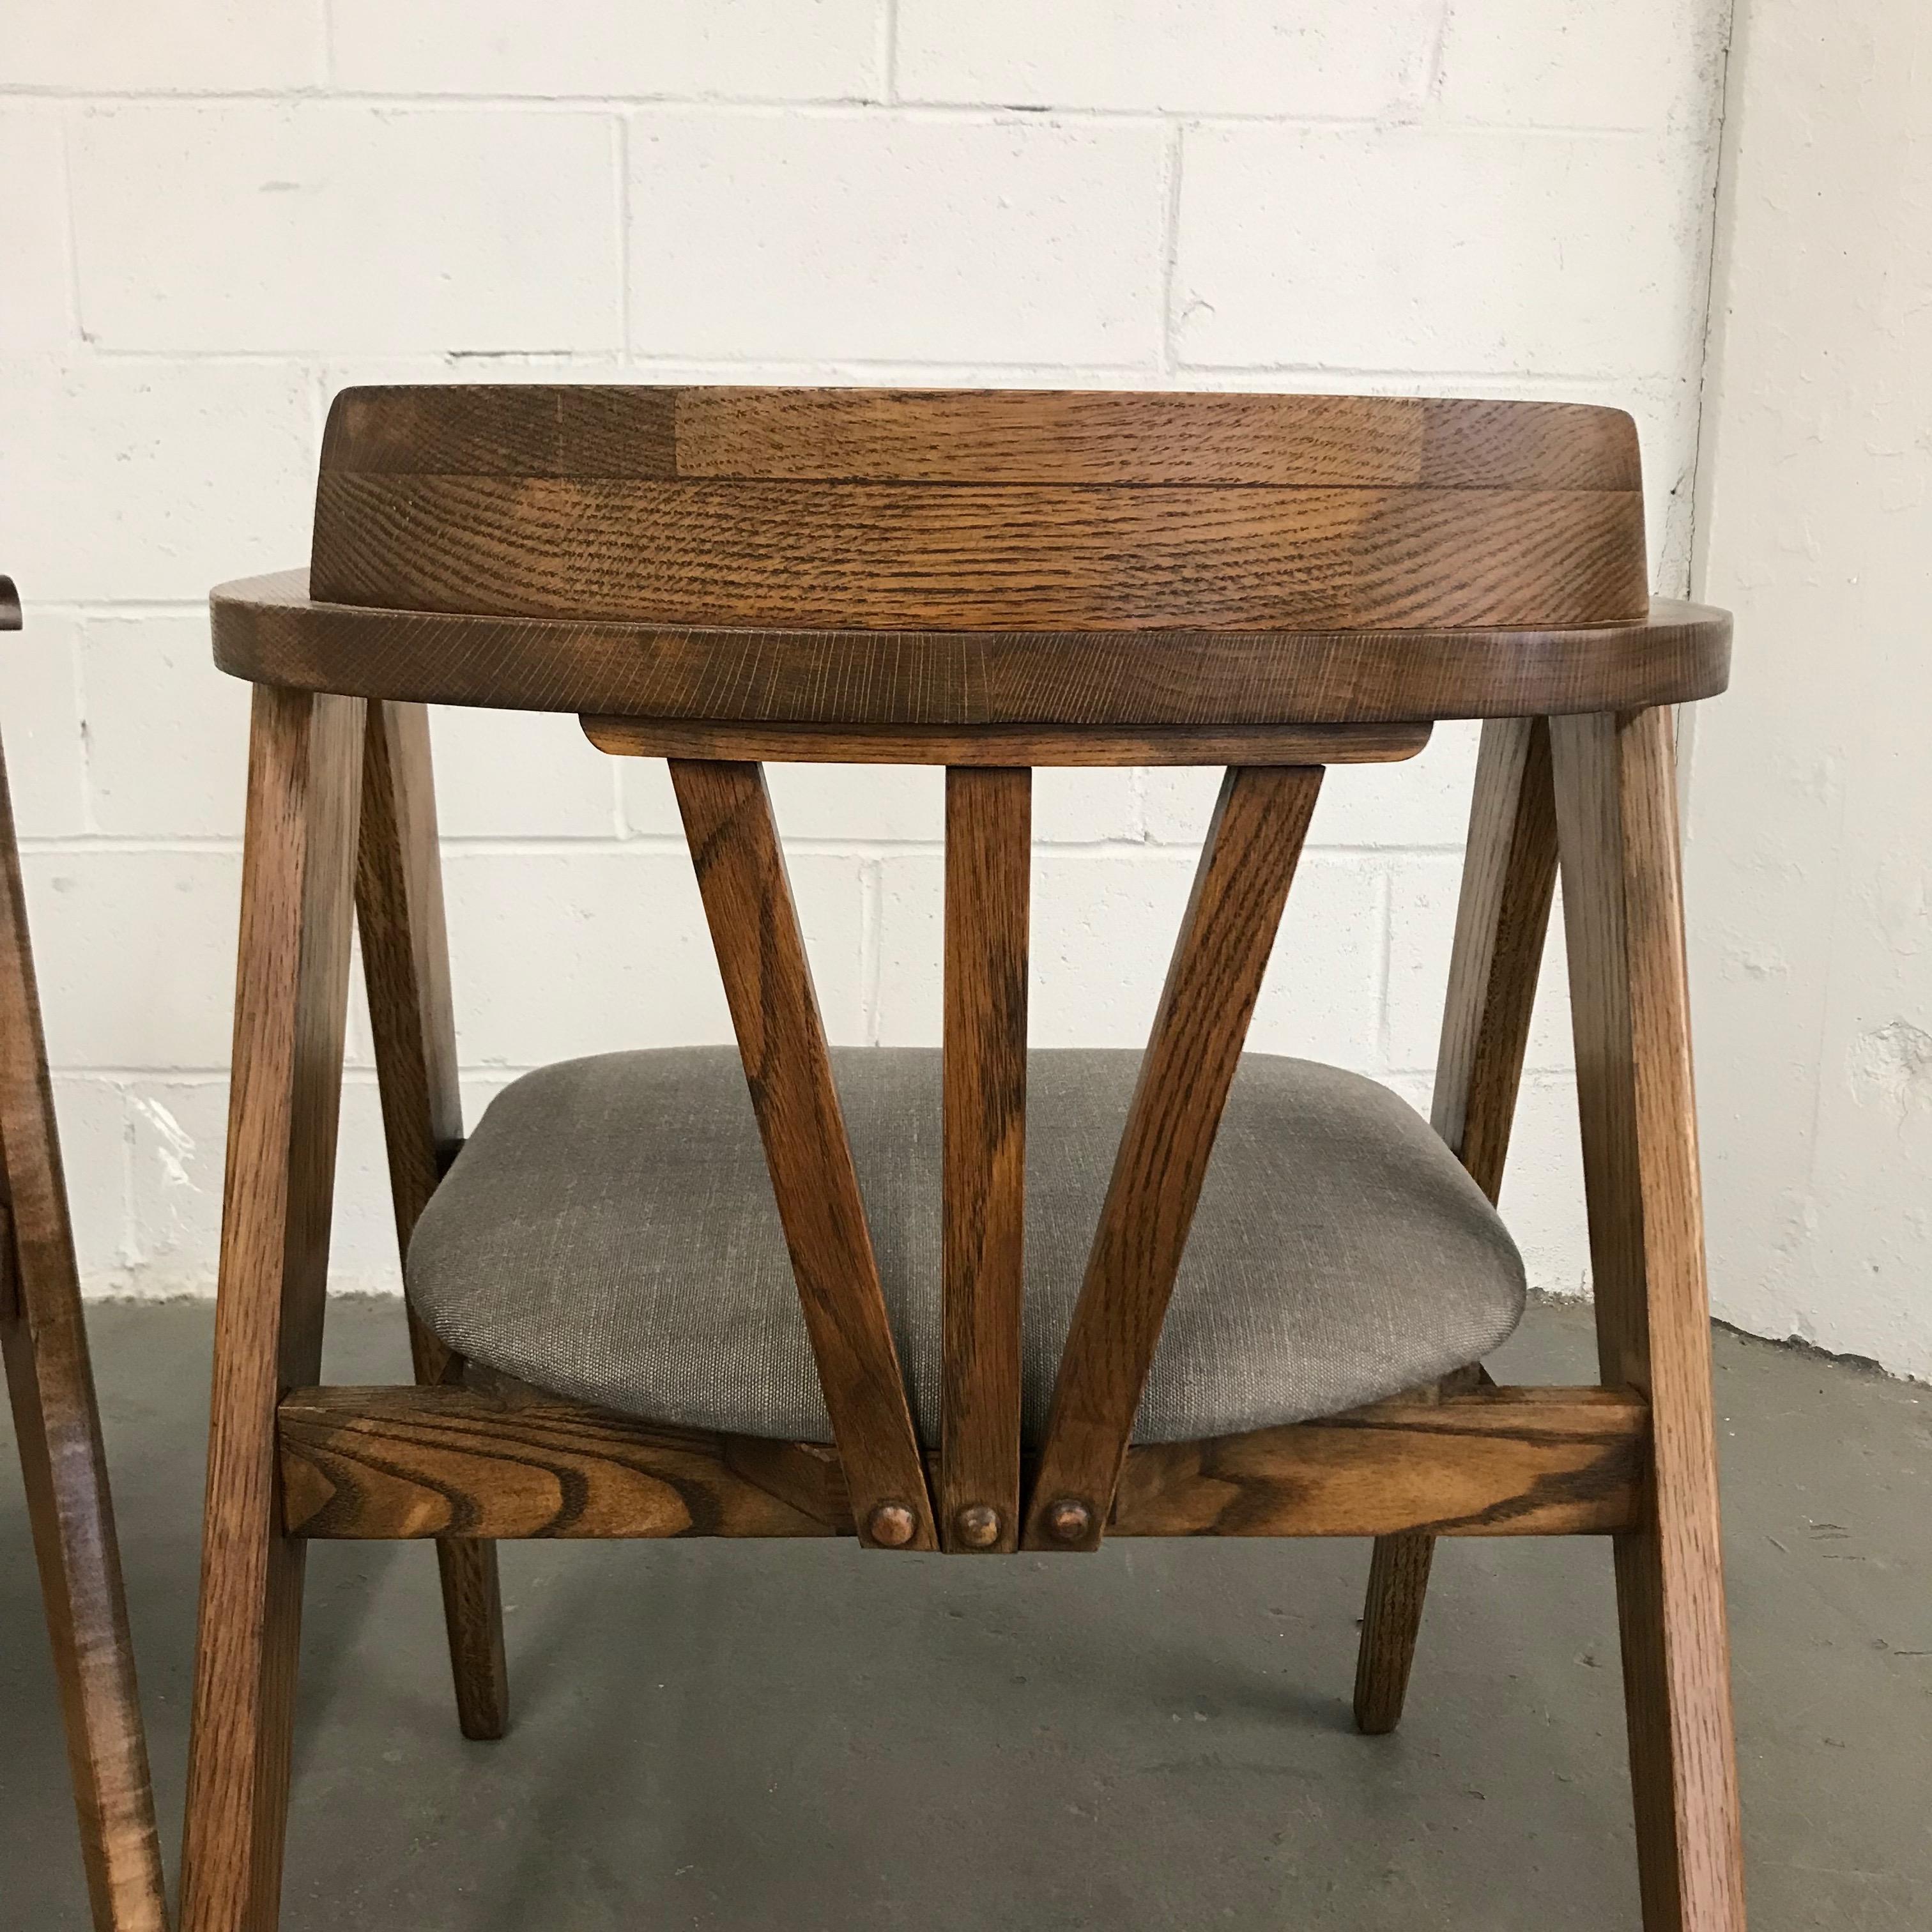 Pair of Mid-Century Modern Oak Compass Chairs 1